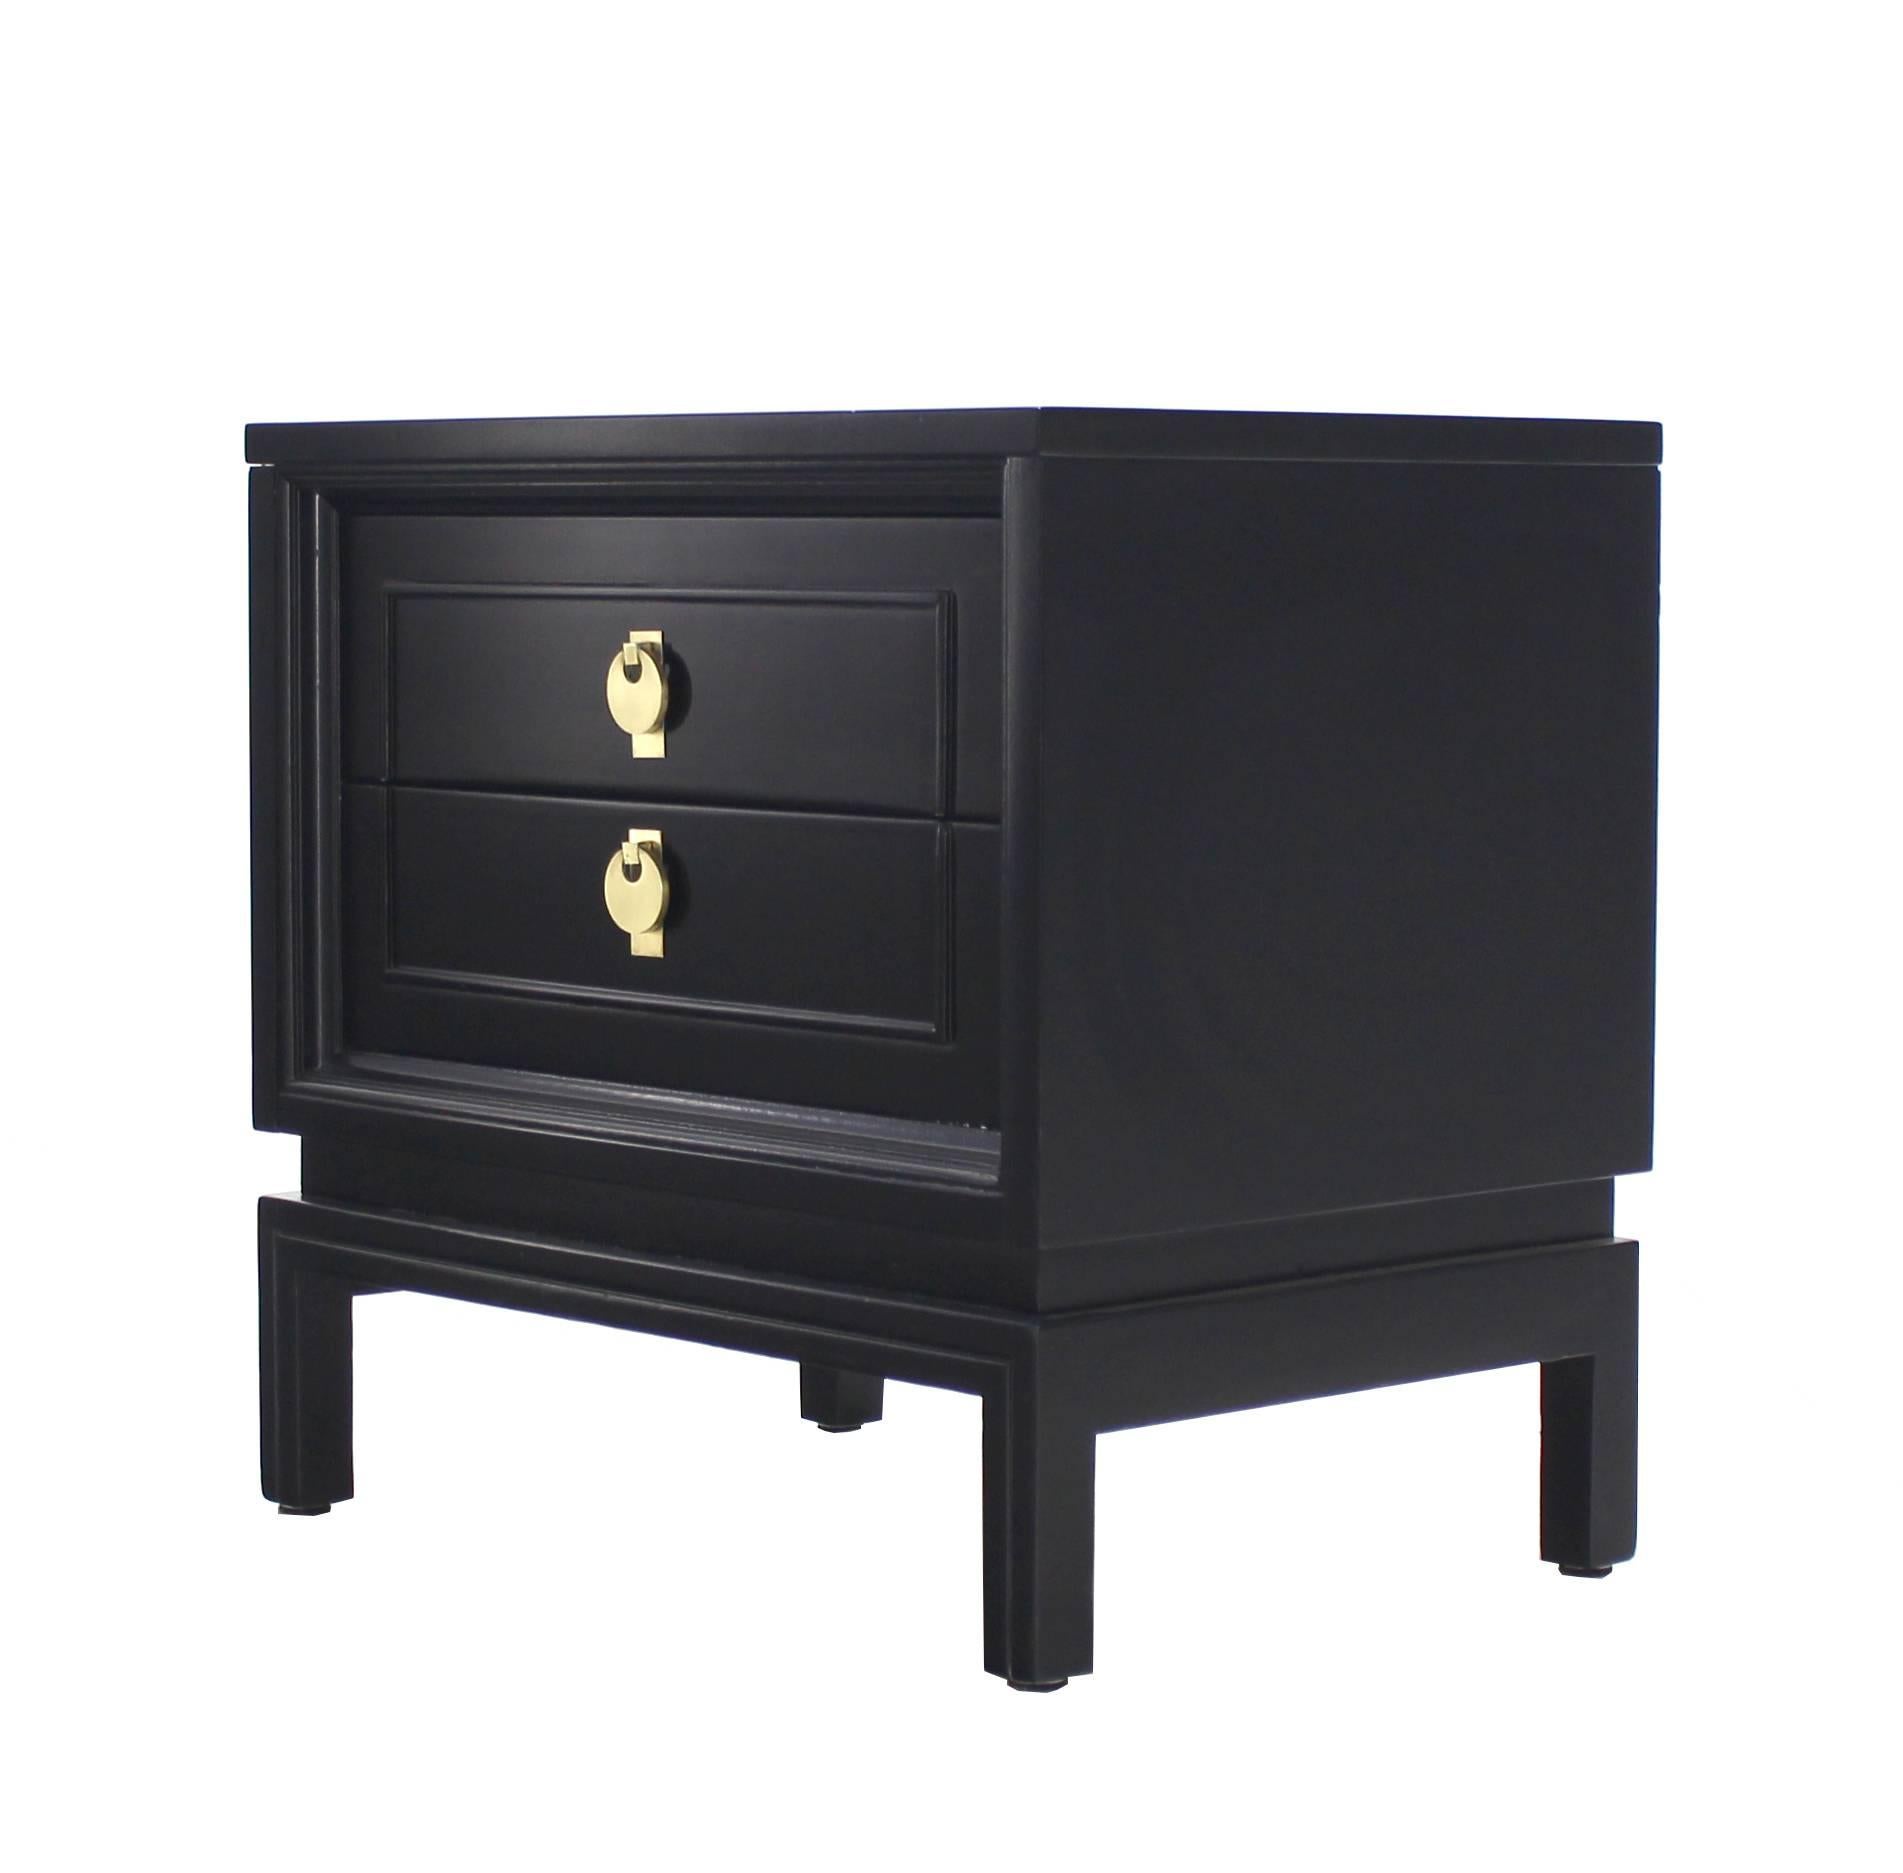 Pair of Mid Century Modern Ebonized Black Lacquer End Tables Nightstands 2